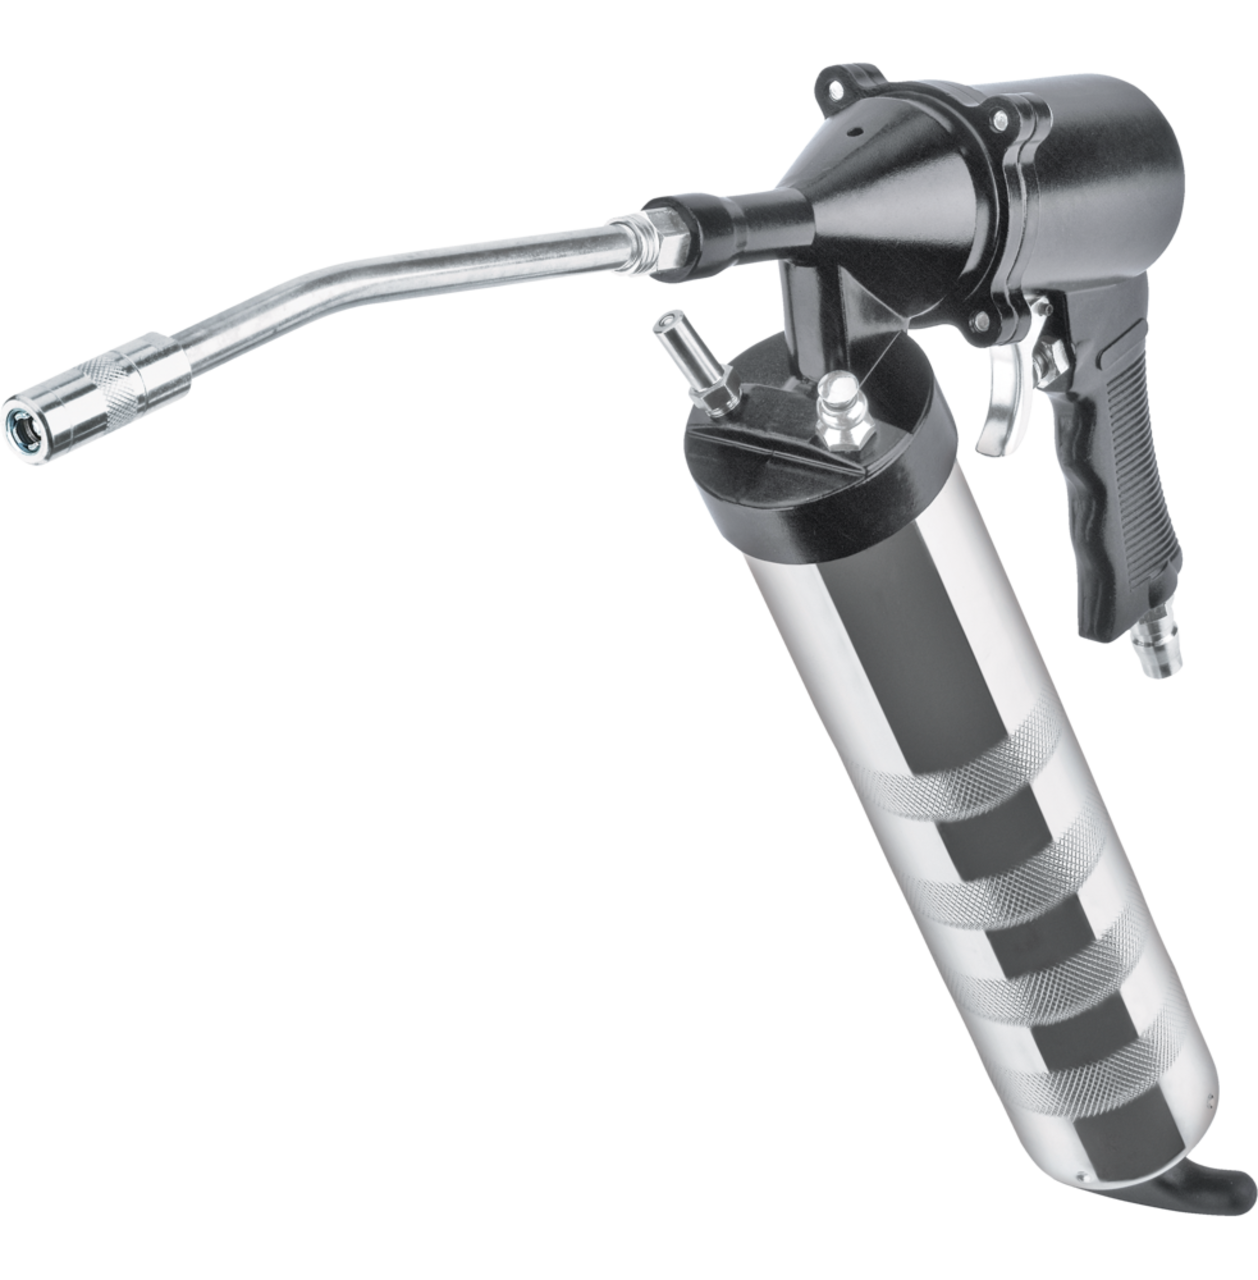 https://media-www.canadiantire.ca/product/automotive/auto-maintenance/oil-change-and-fuel-accessories/0282705/air-powered-single-action-grease-gun-af2a9d95-fddd-49ad-84a9-ea3523da959c.png?imdensity=1&imwidth=640&impolicy=mZoom